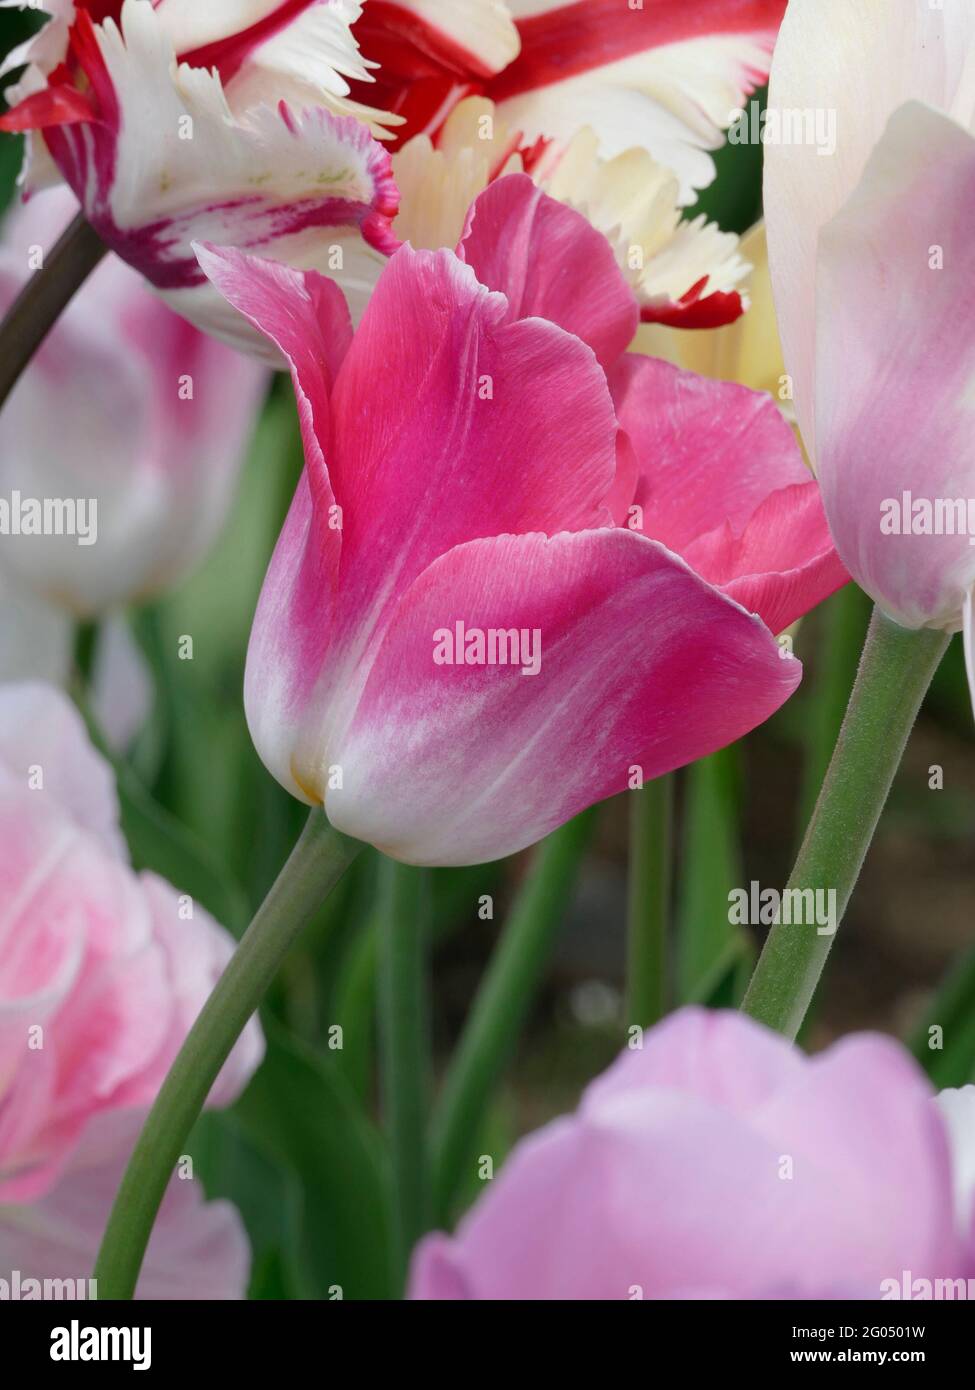 The Award Winning Dreamland Tulip with Petals Showcasing a Gradient of White and Soft Pink in a Garden of Colorful Tulips Stock Photo